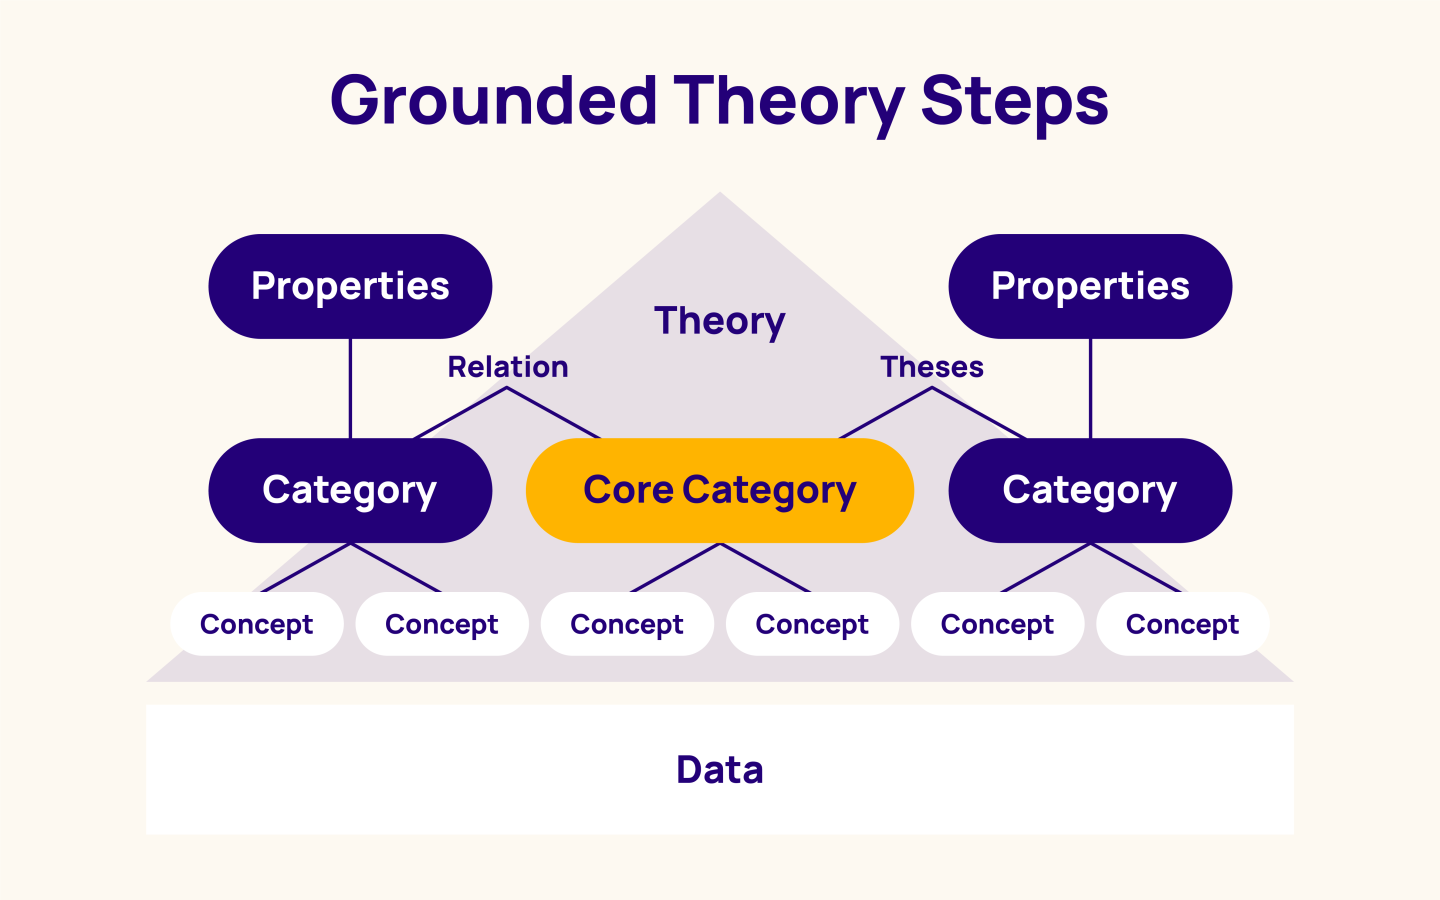 a research question appropriate for a grounded theory approach is